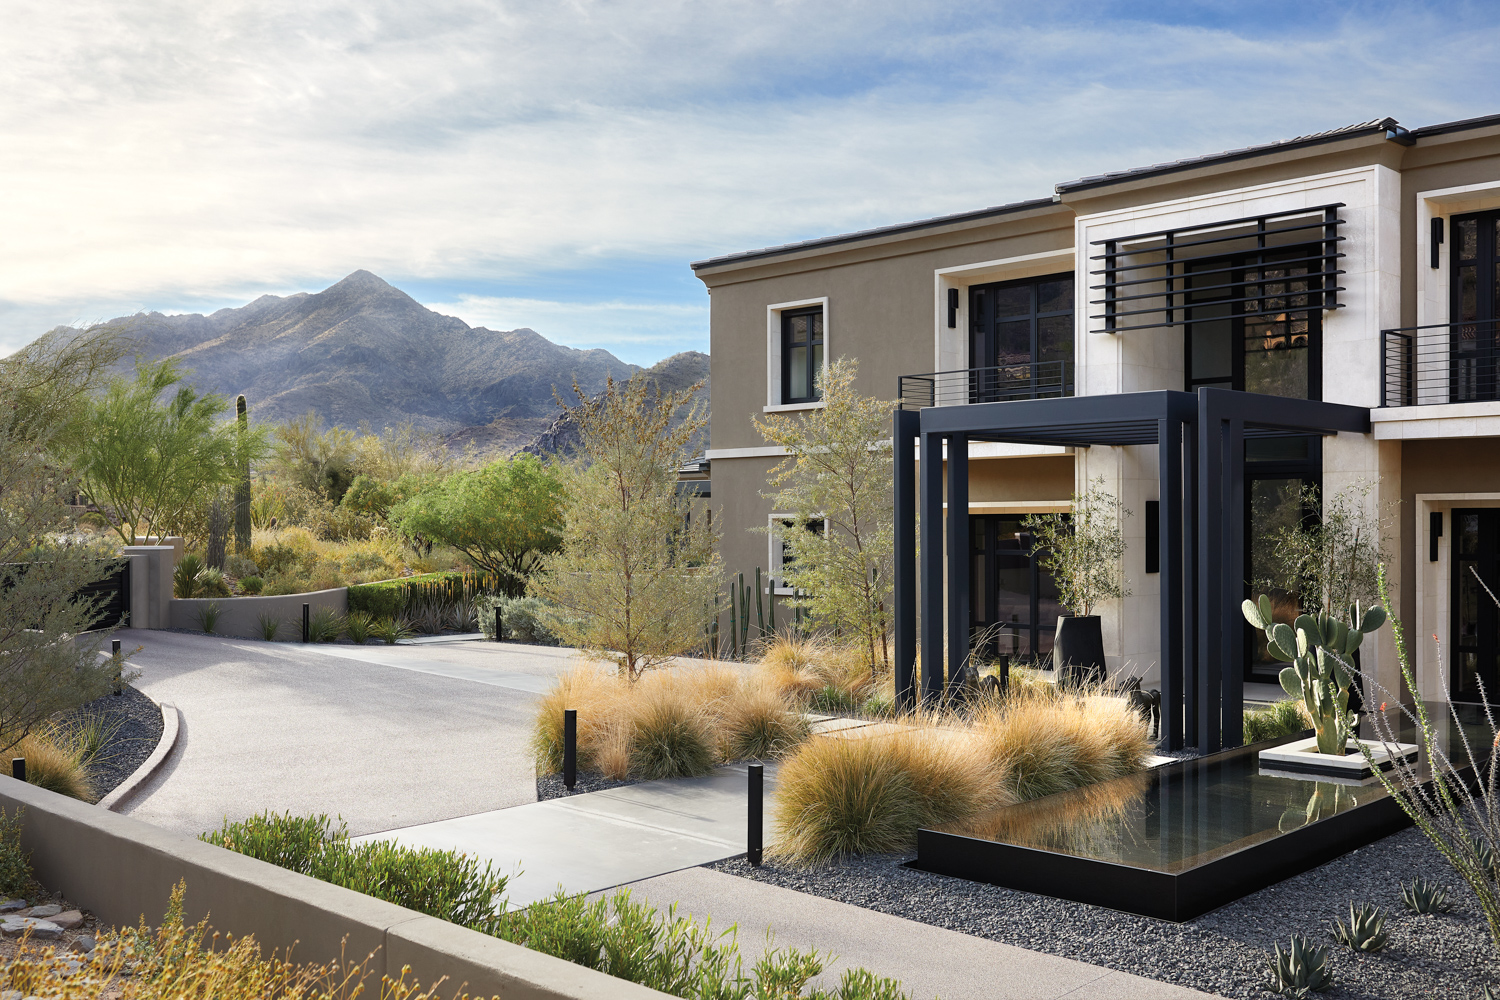 The outsdie of a modern house with a black metal frame entrance. Native desert landscaping surrounds the house and there is a mountain in the background.